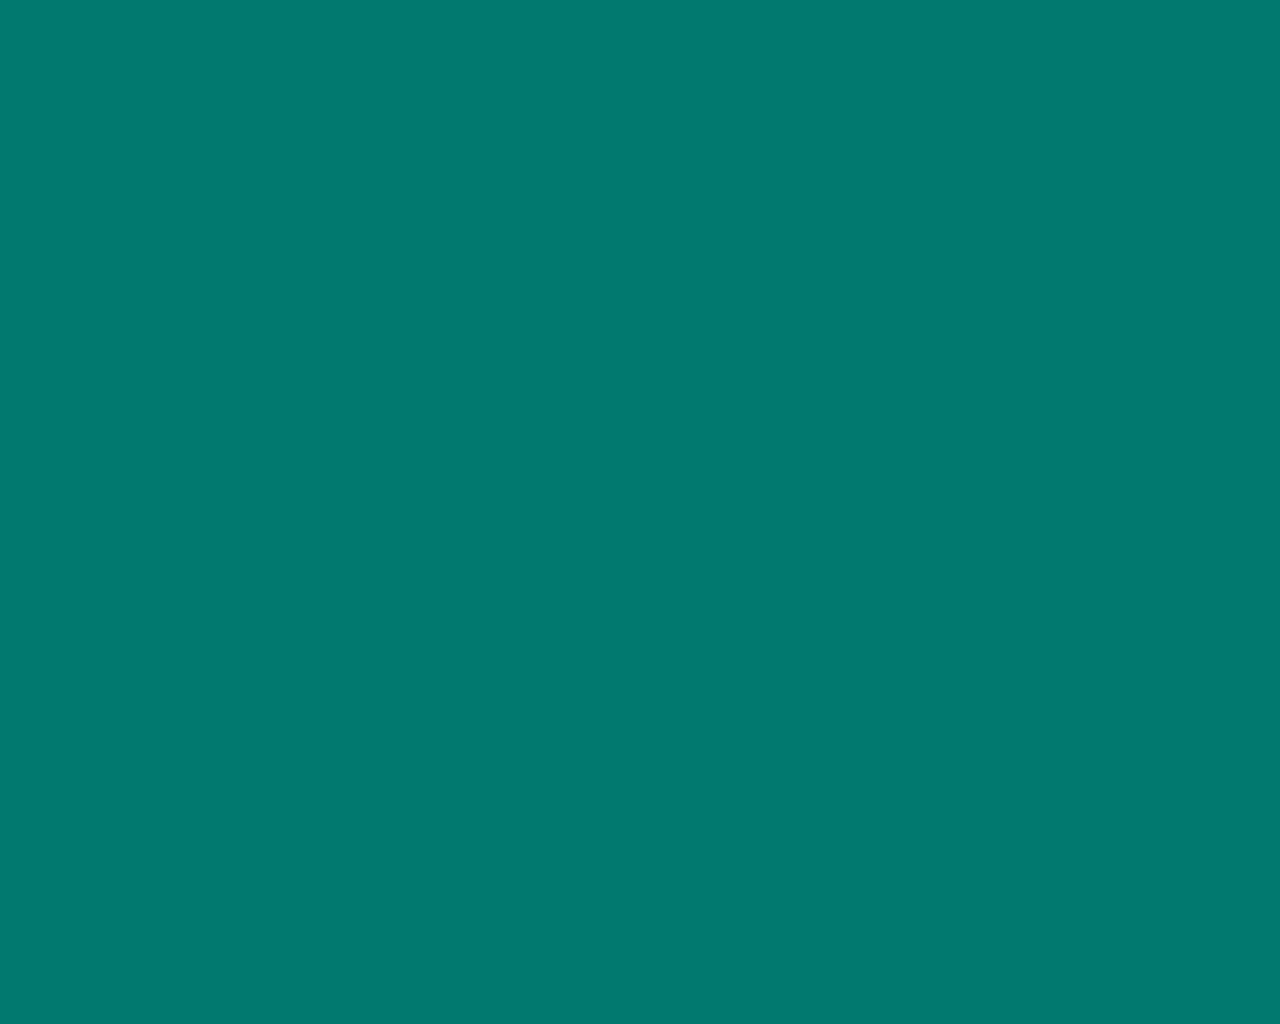 1280x1024 Pine Green Solid Color Background